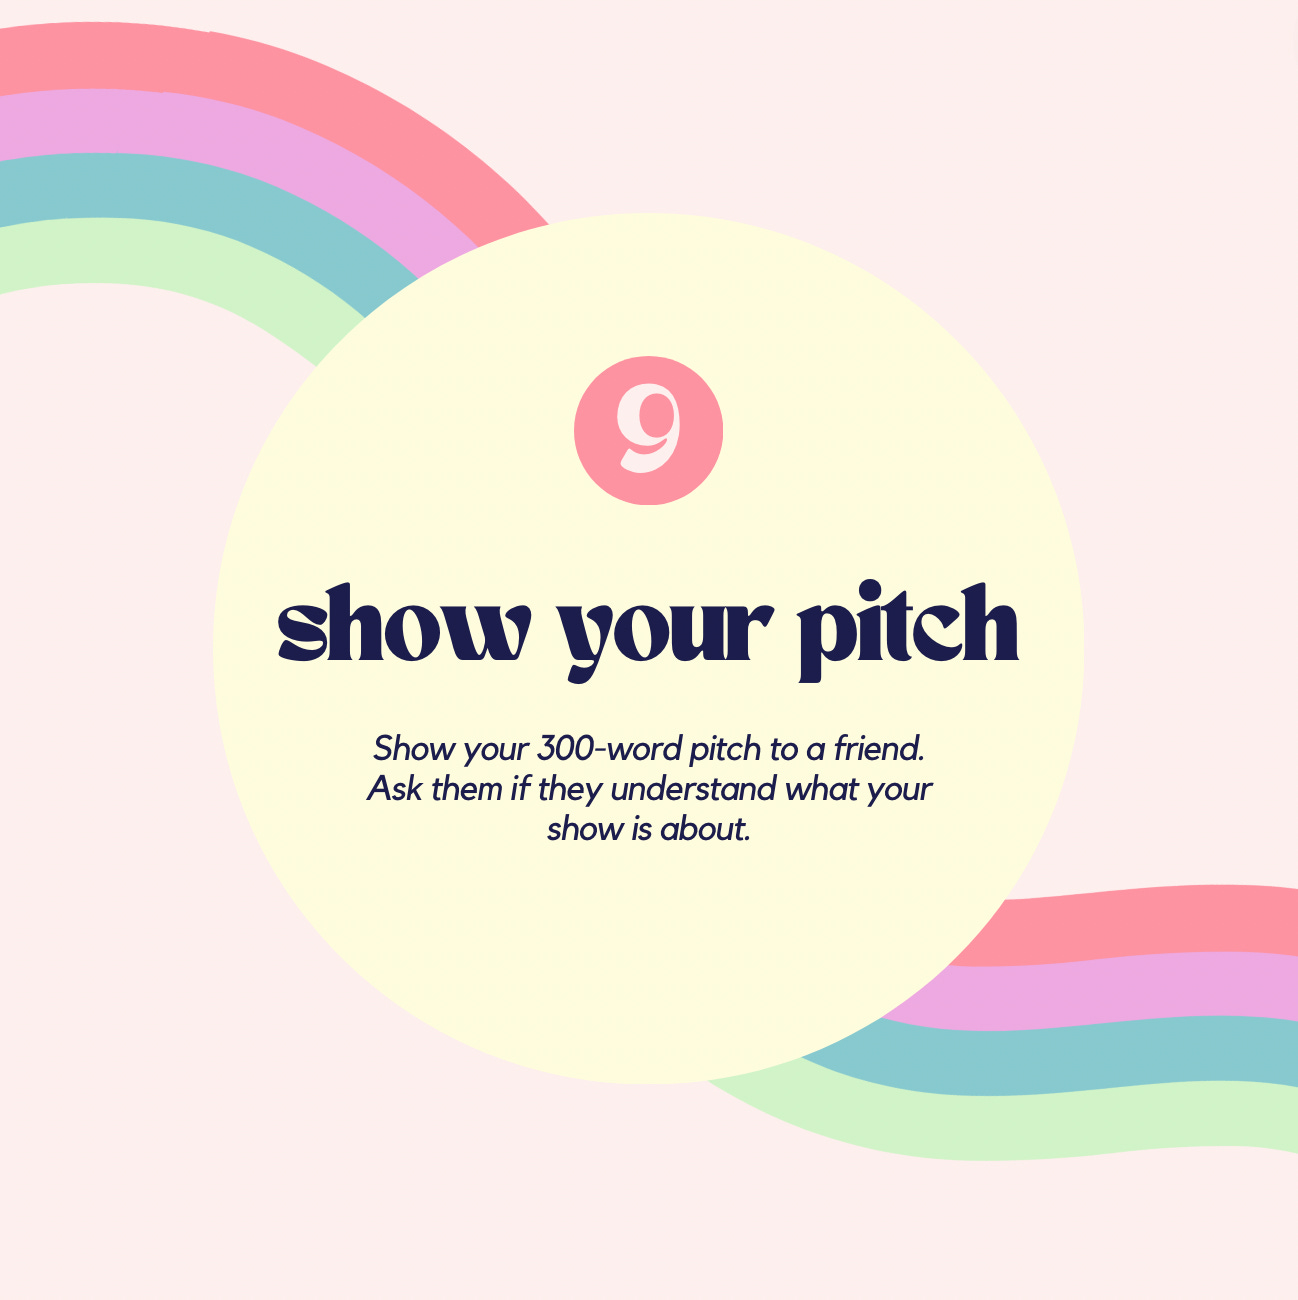 show your pitch! Show your 300-word pitch to a friend. Ask them if they understand what your show is about.